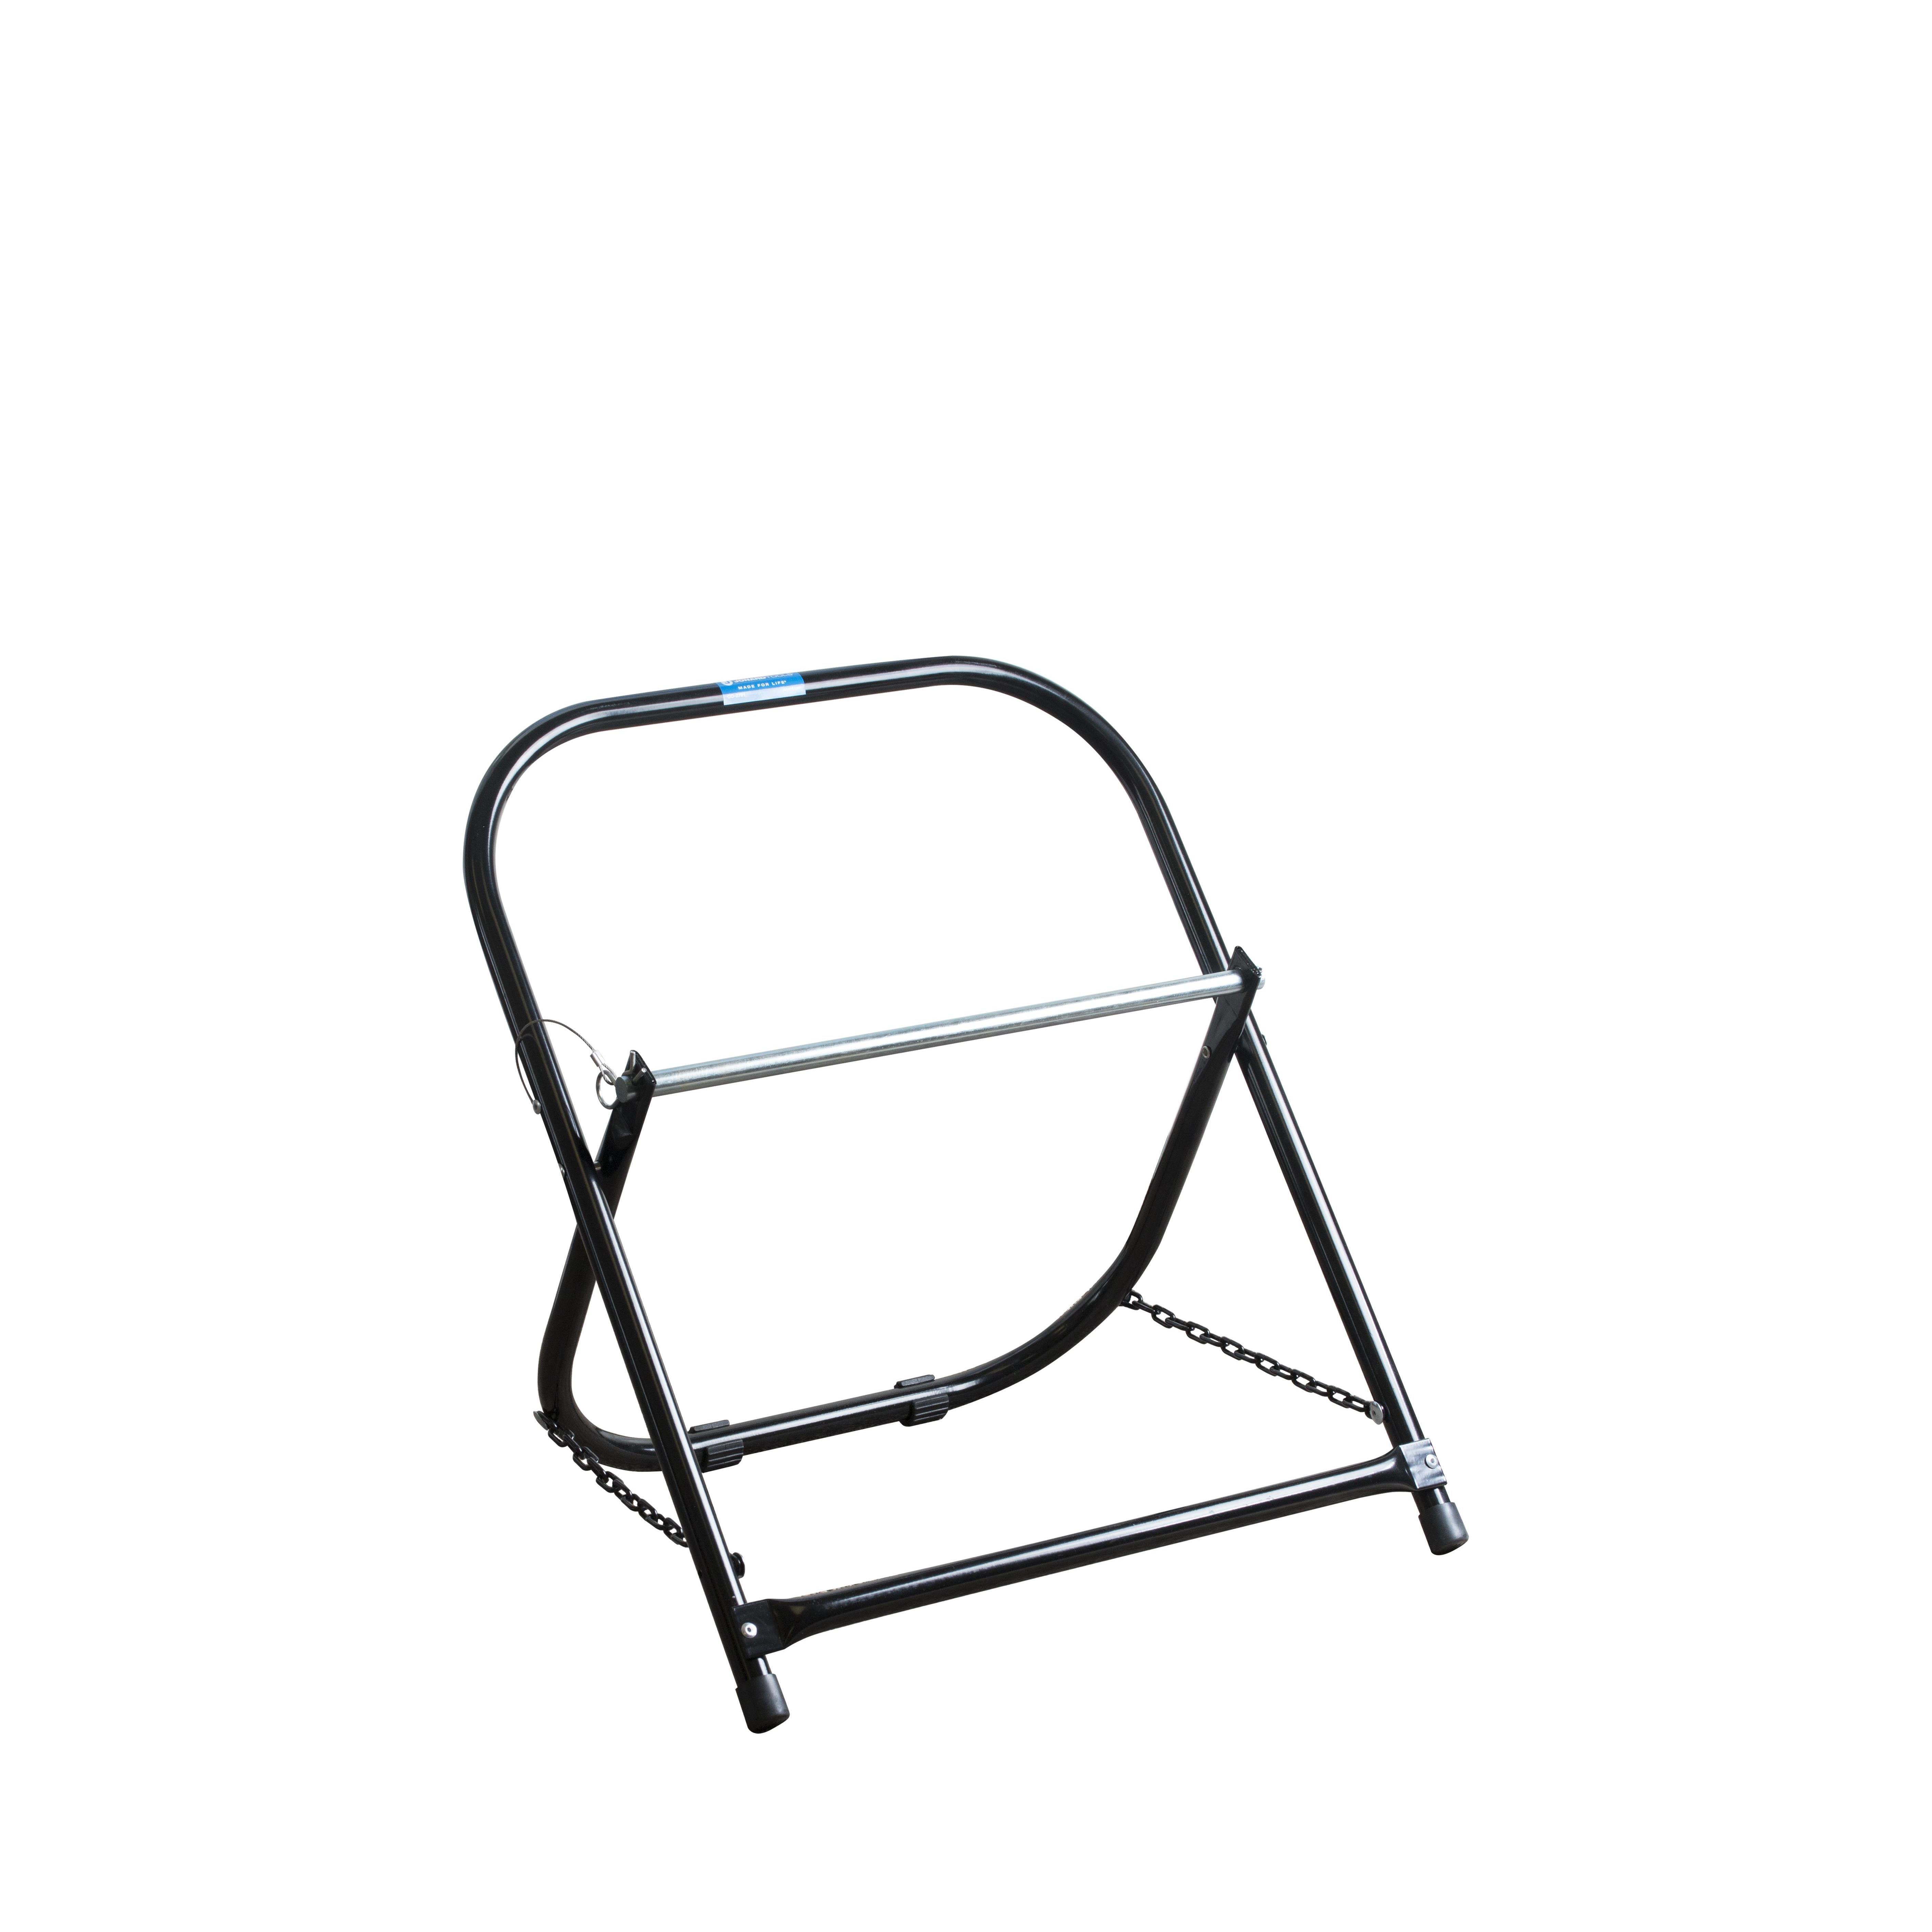 【CC-2726】STEEL CABLE CADDY, 26" WIDE